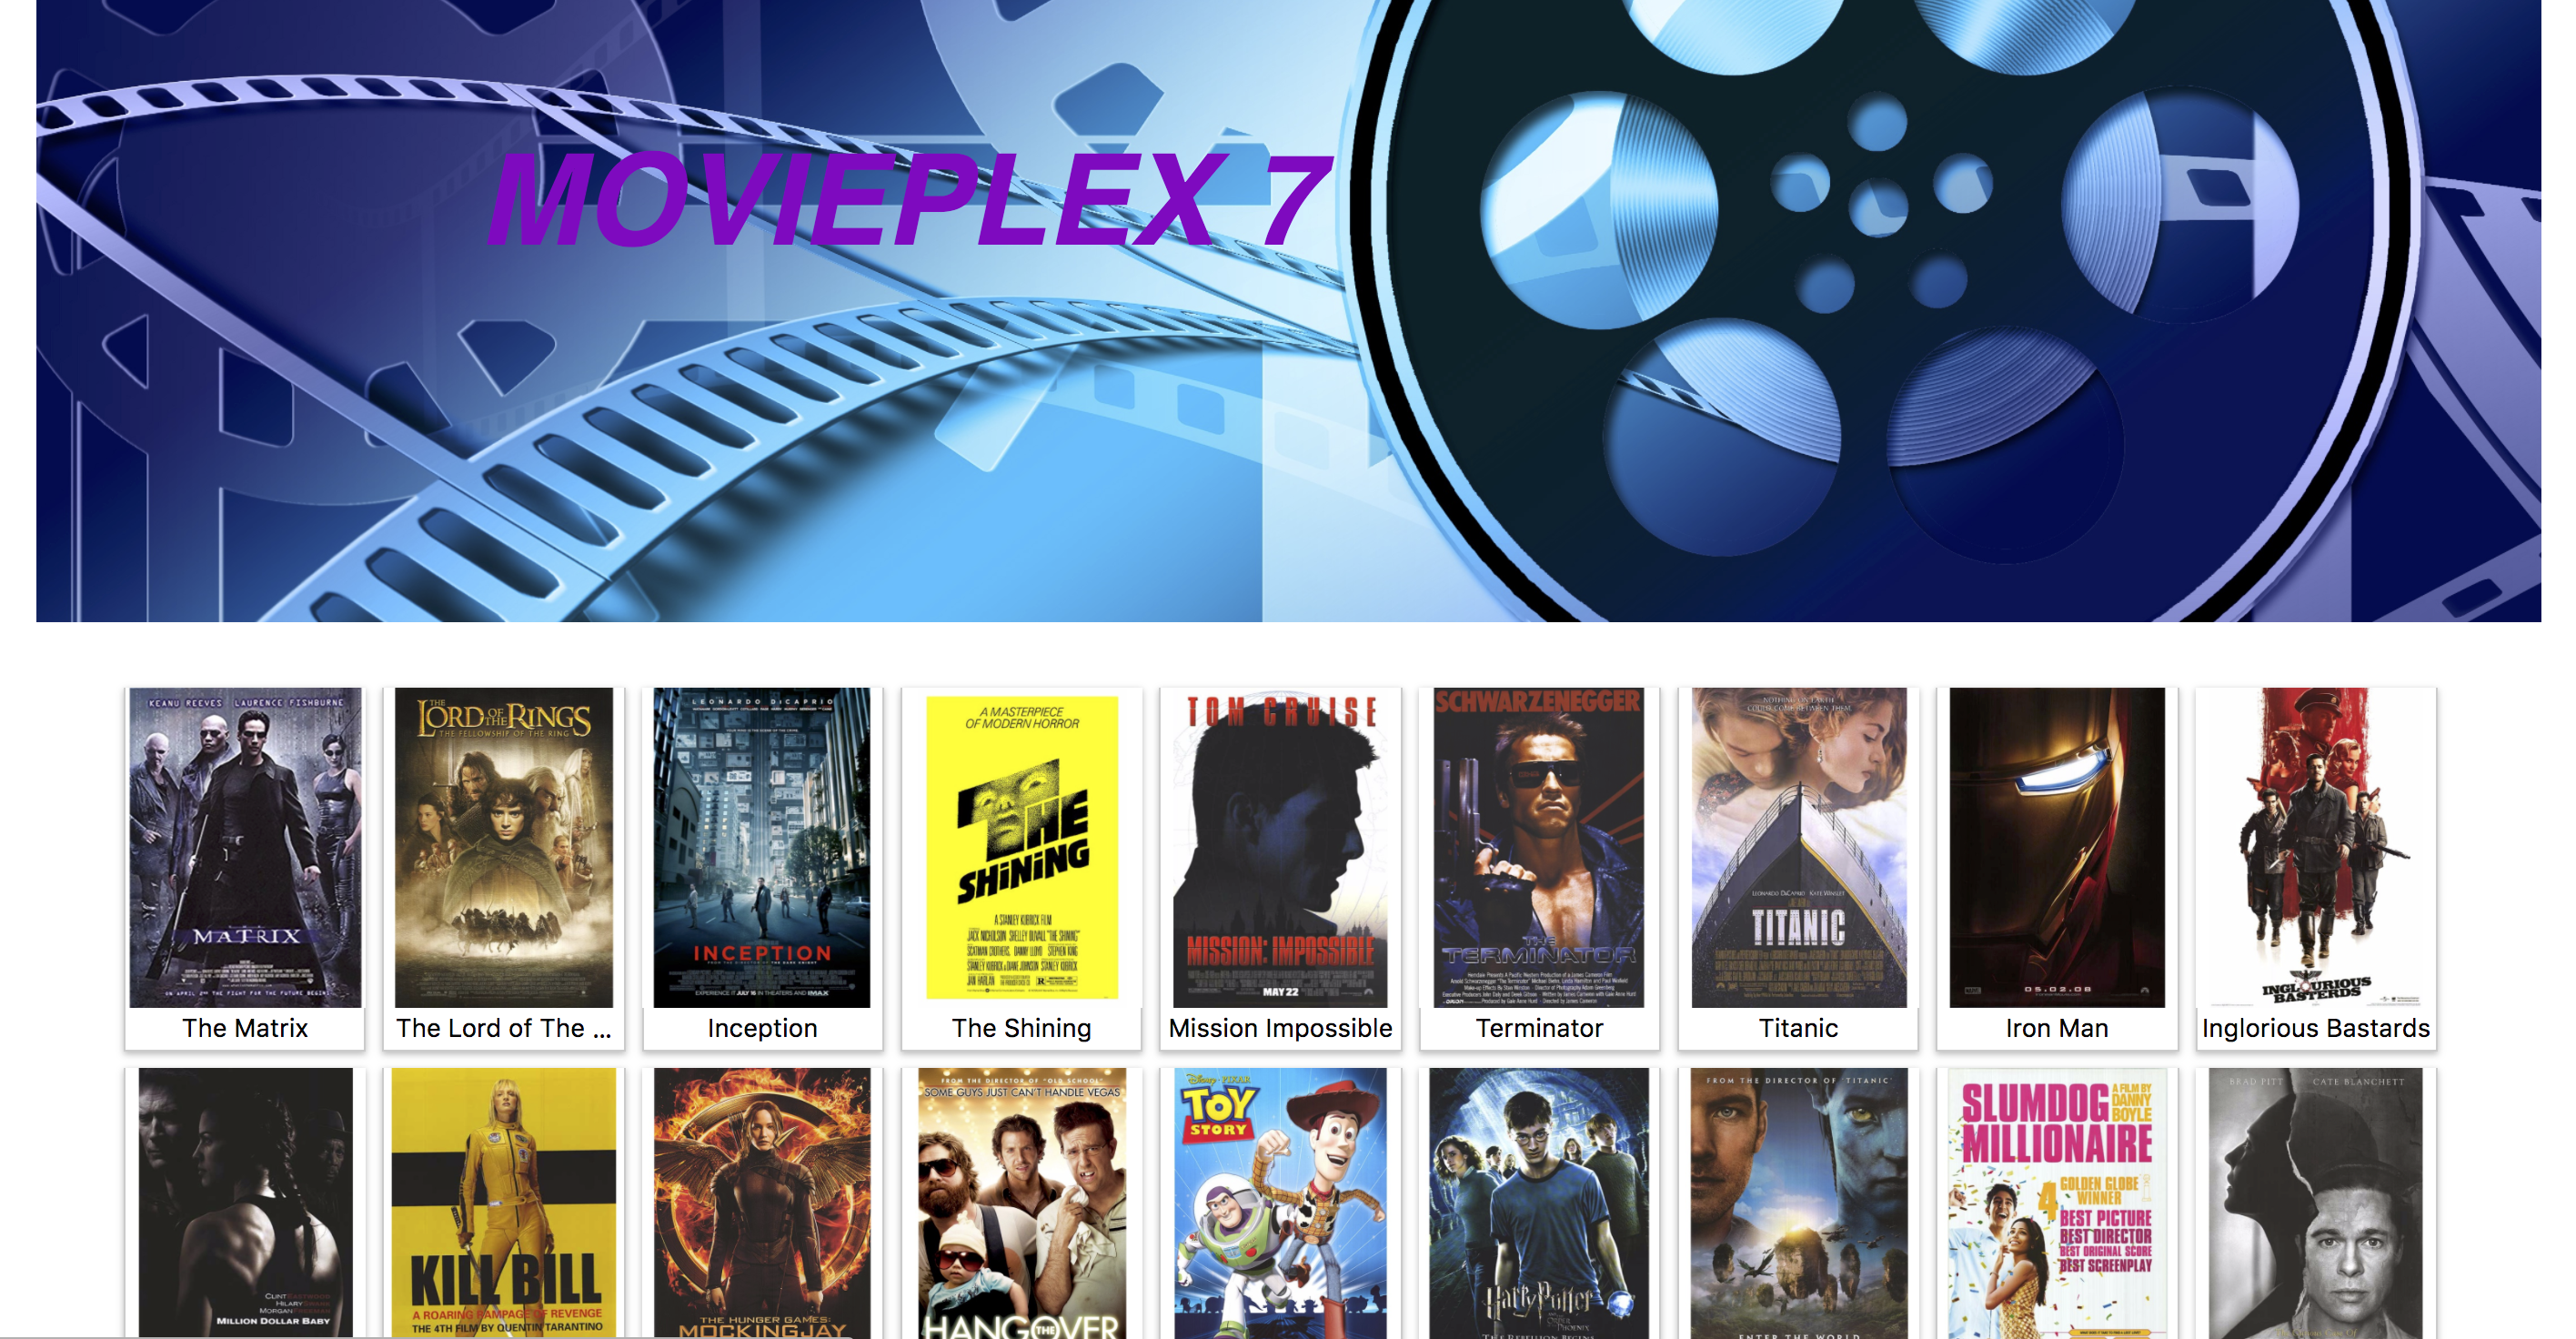 Movieplex7 React Front-end